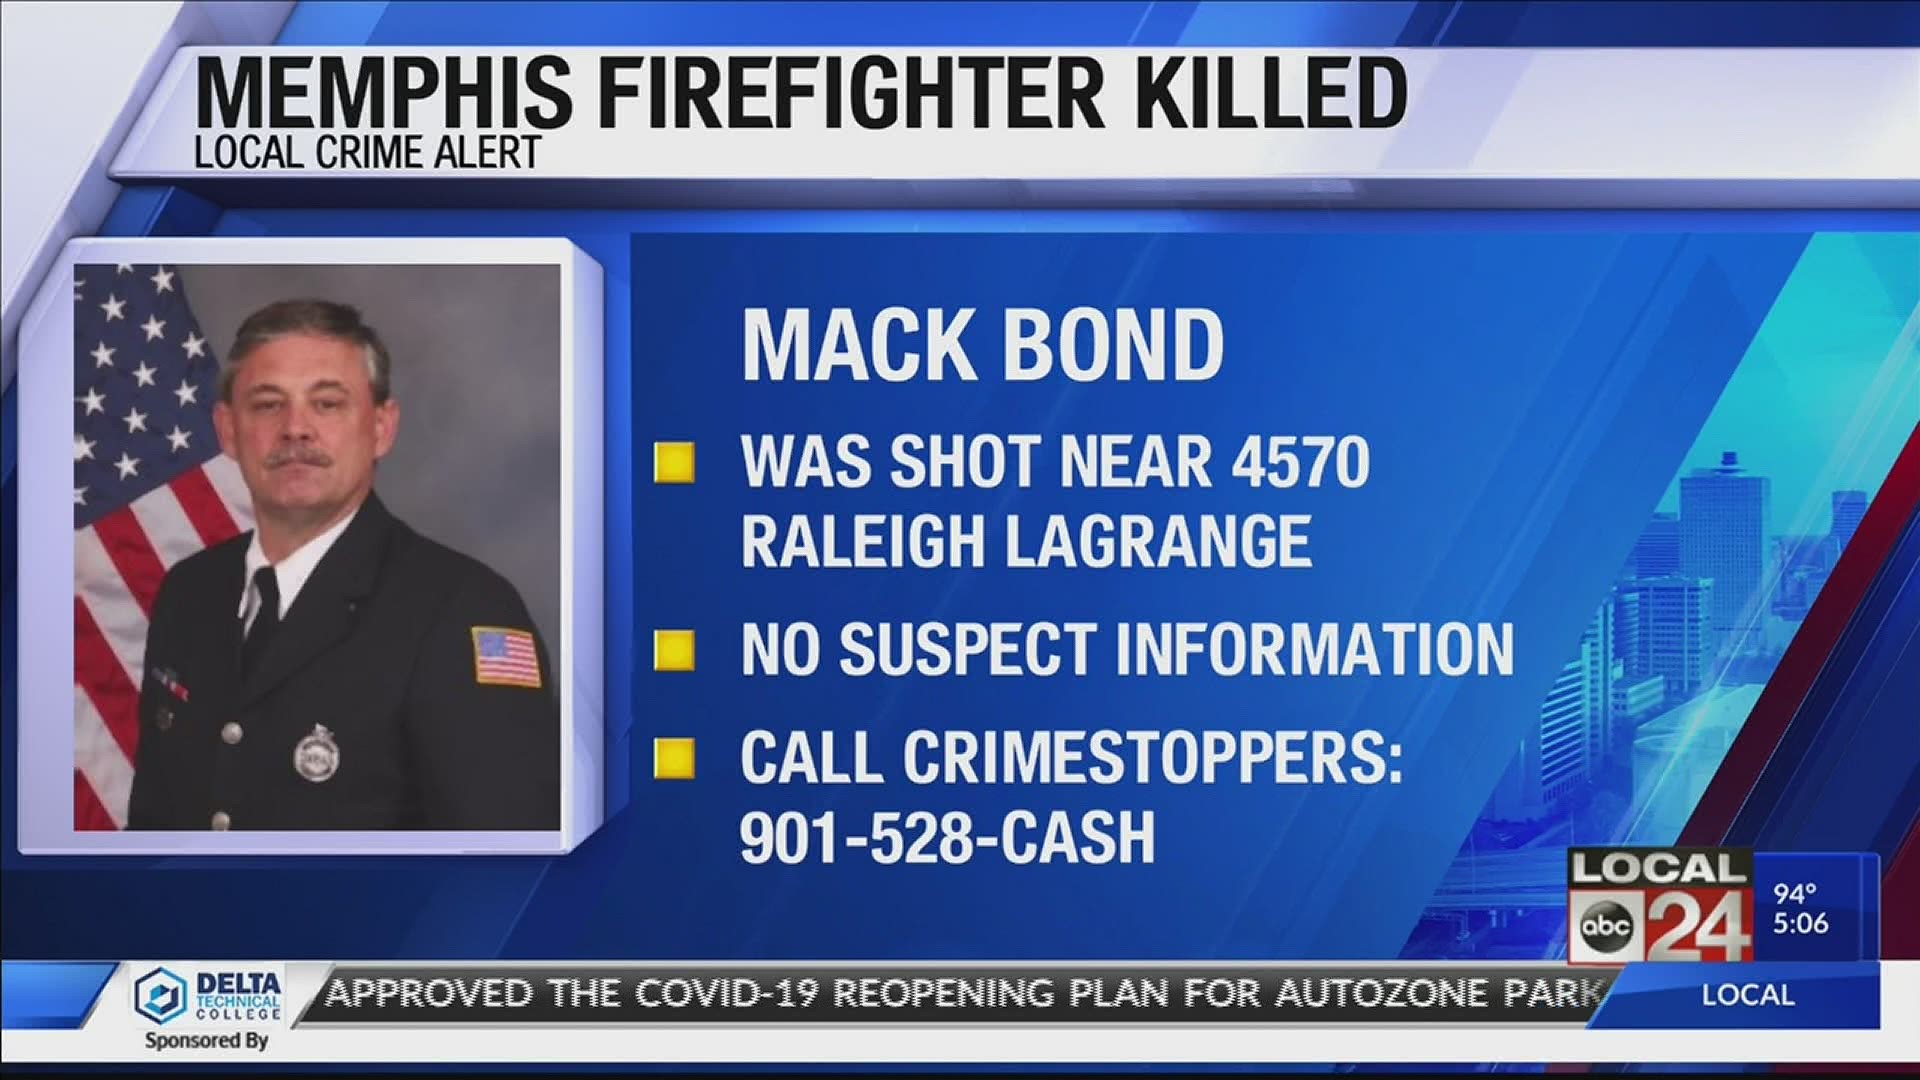 Mack Bond was with the Memphis Fire Department for 21 years